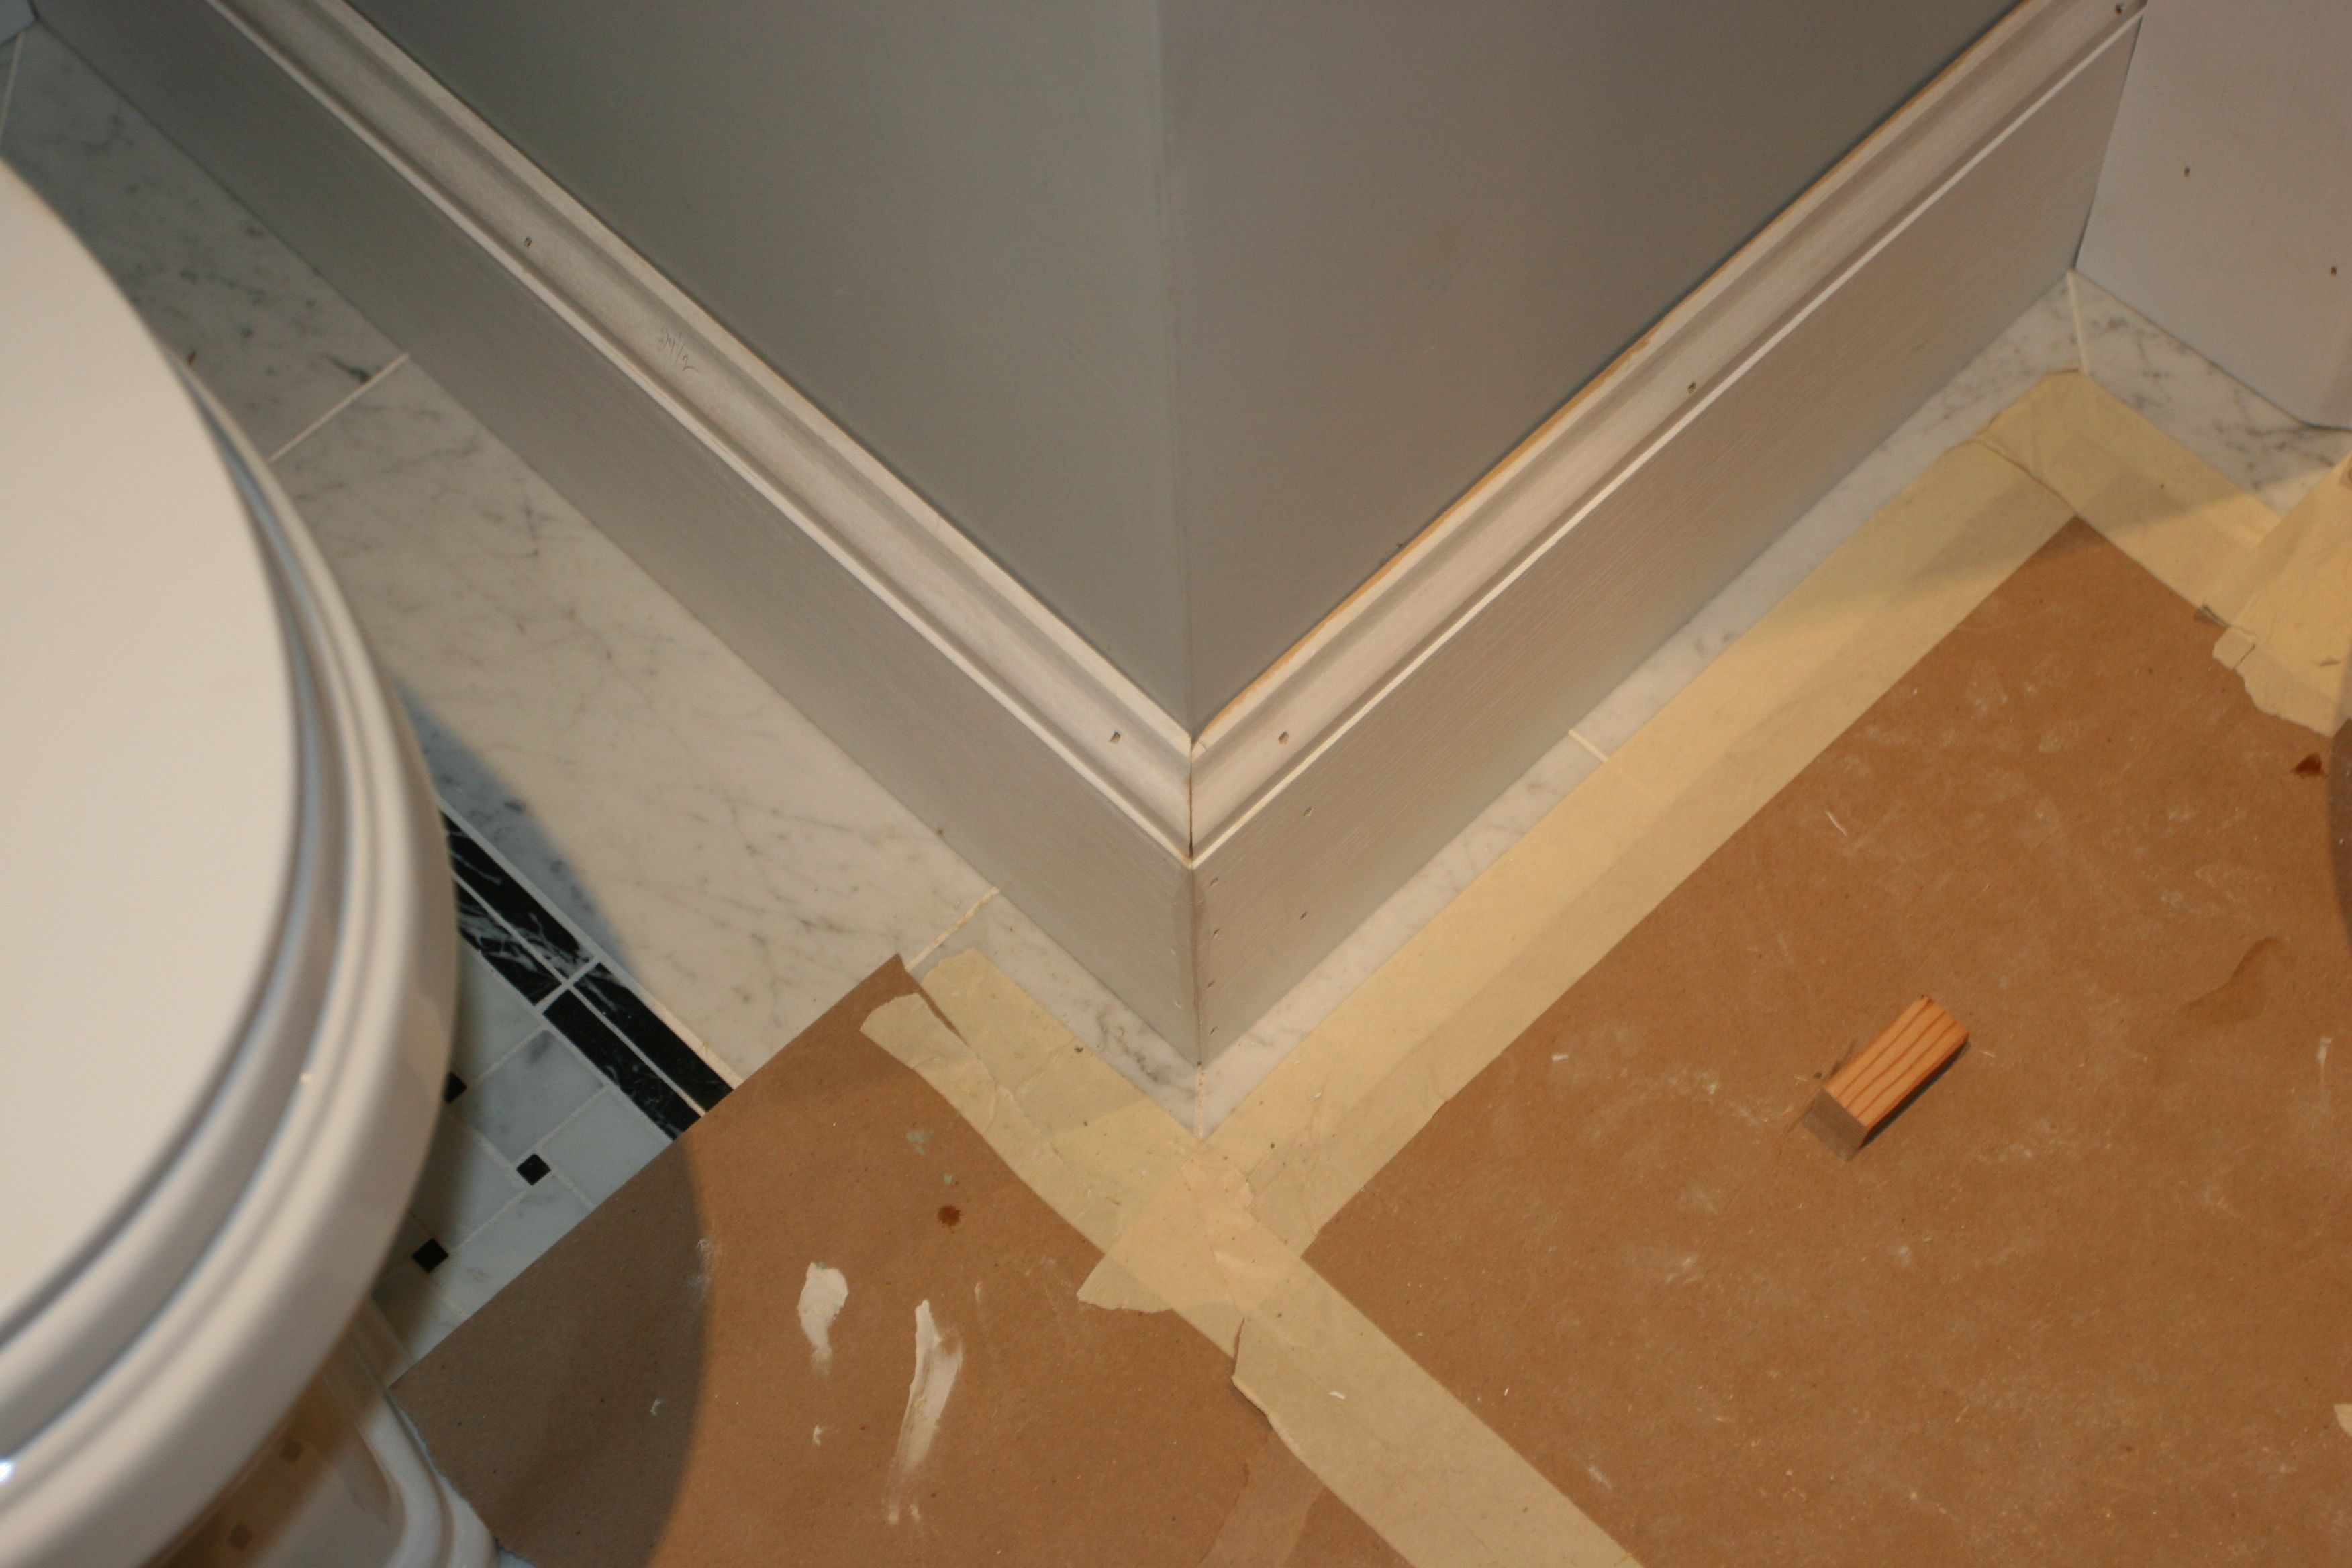 More baseboard shots. Makes such a difference. And I think they still have to put on the quarter round.